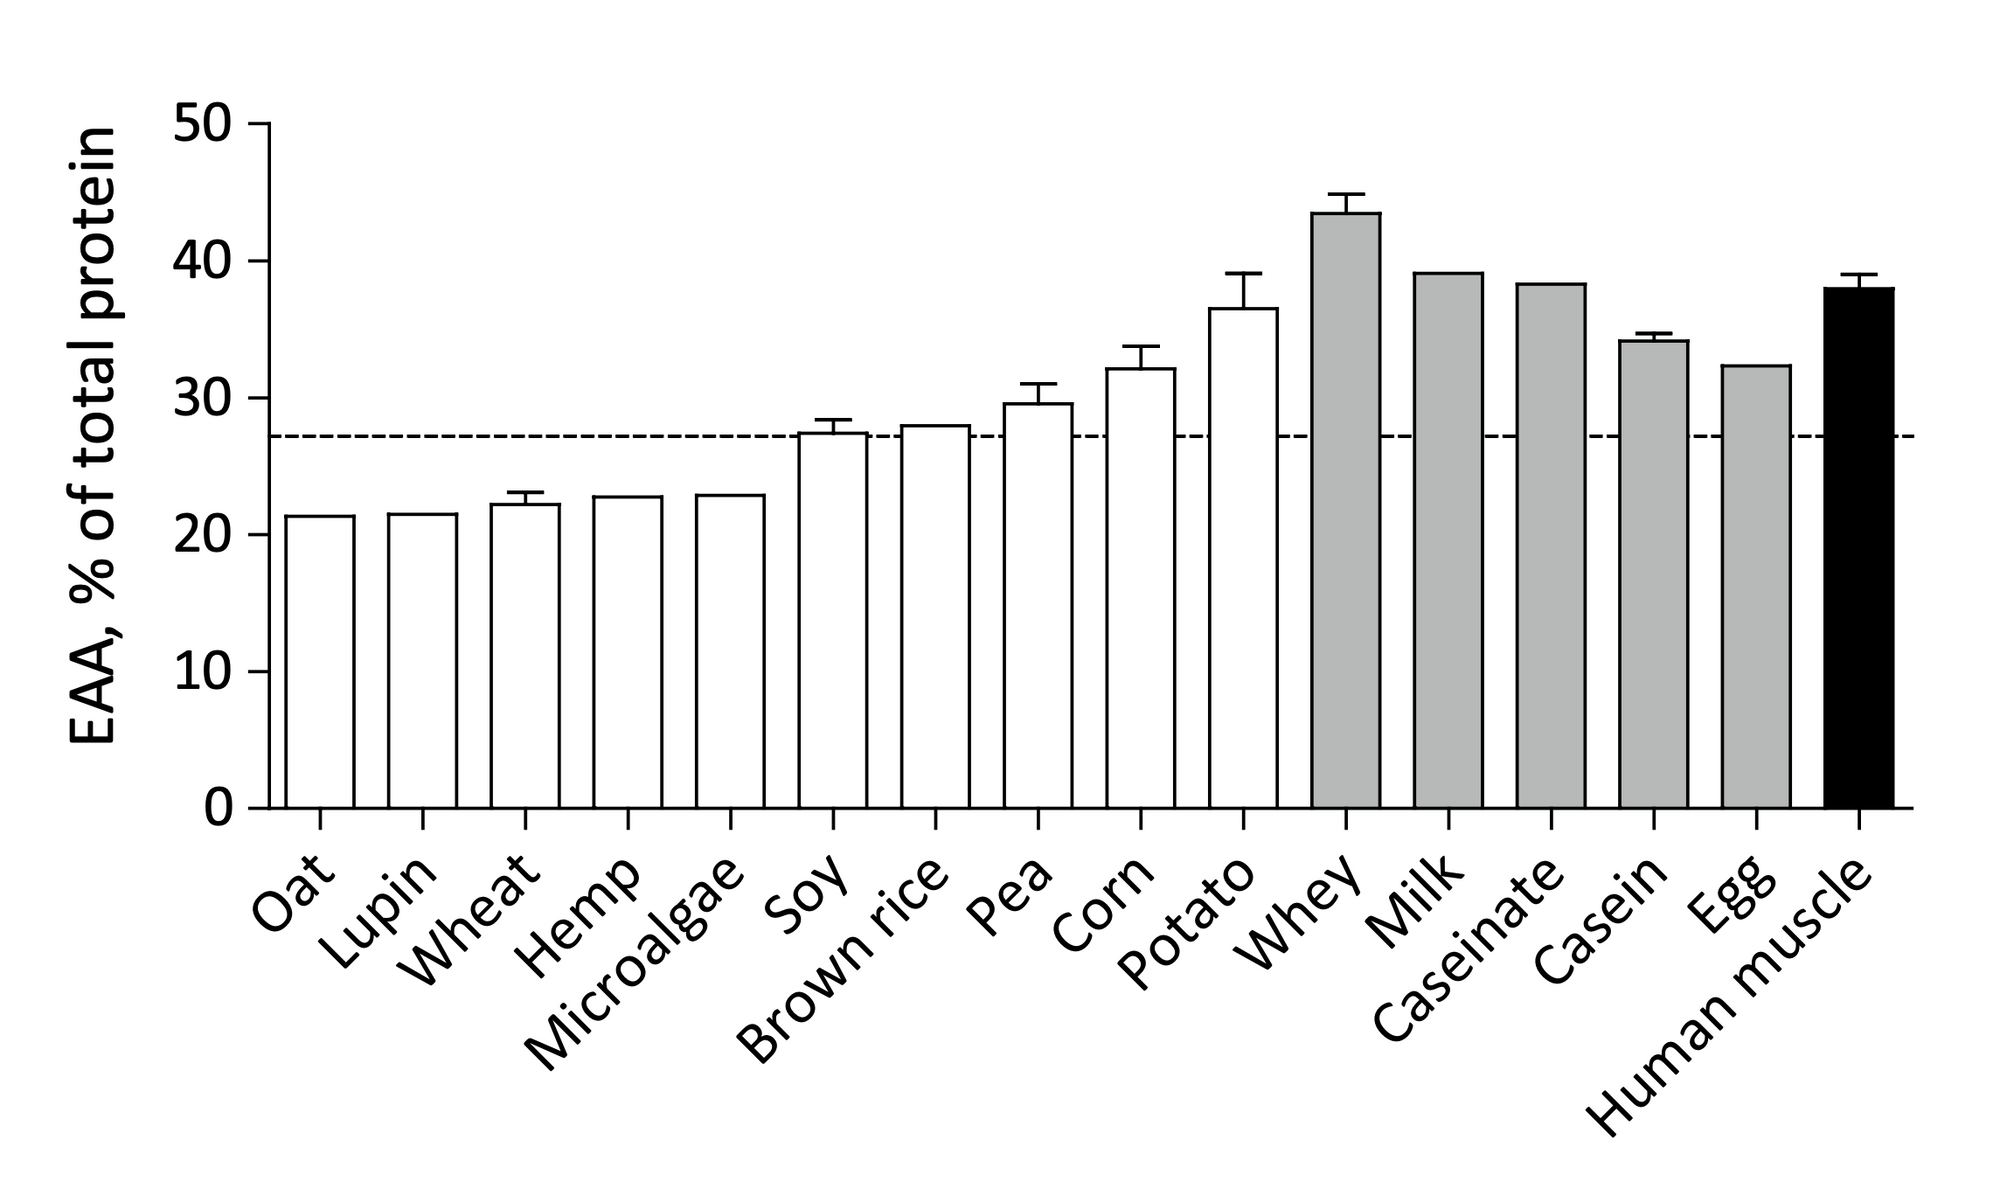 Gorissen, S.H.M., Crombag, J.J.R., Senden, J.M.G. et al. Protein content and amino acid composition of commercially available plant-based protein isolates. Amino Acids 50, 1685–1695 (2018). https://doi.org/10.1007/s00726-018-2640-5